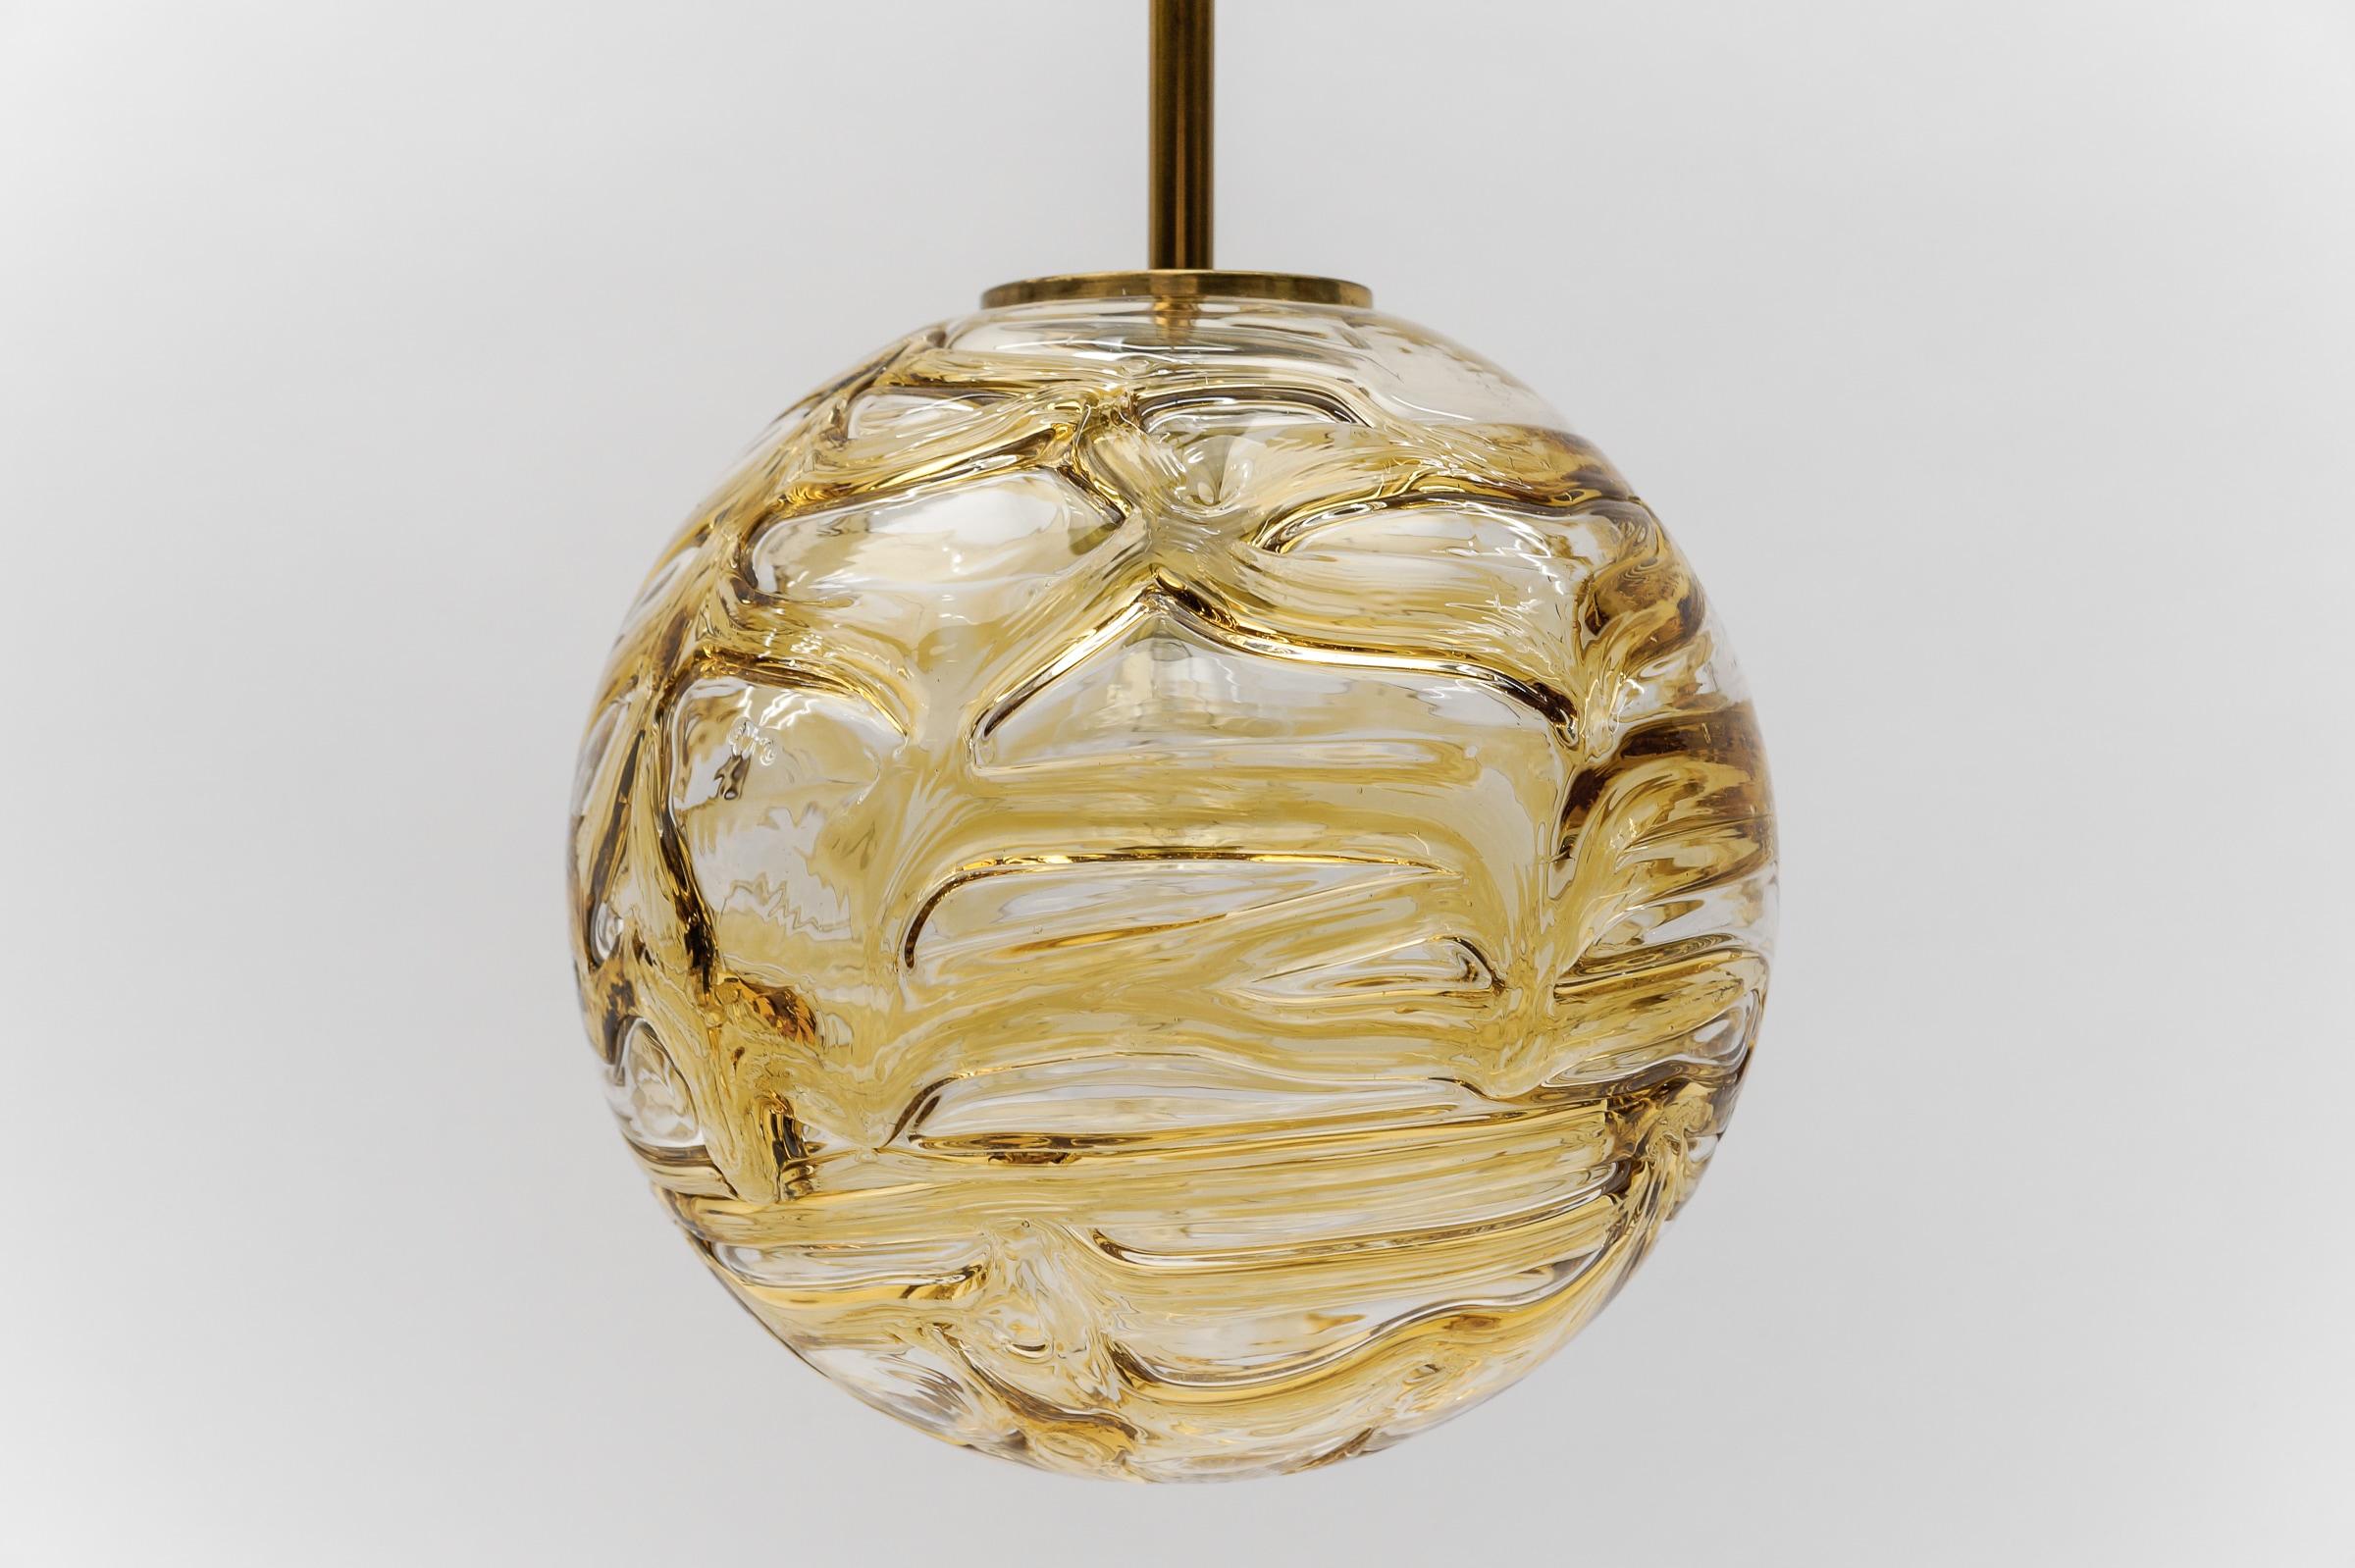 Yellow Murano Glass Ball Pendant Lamp by Doria, - 1960s Germany For Sale 1